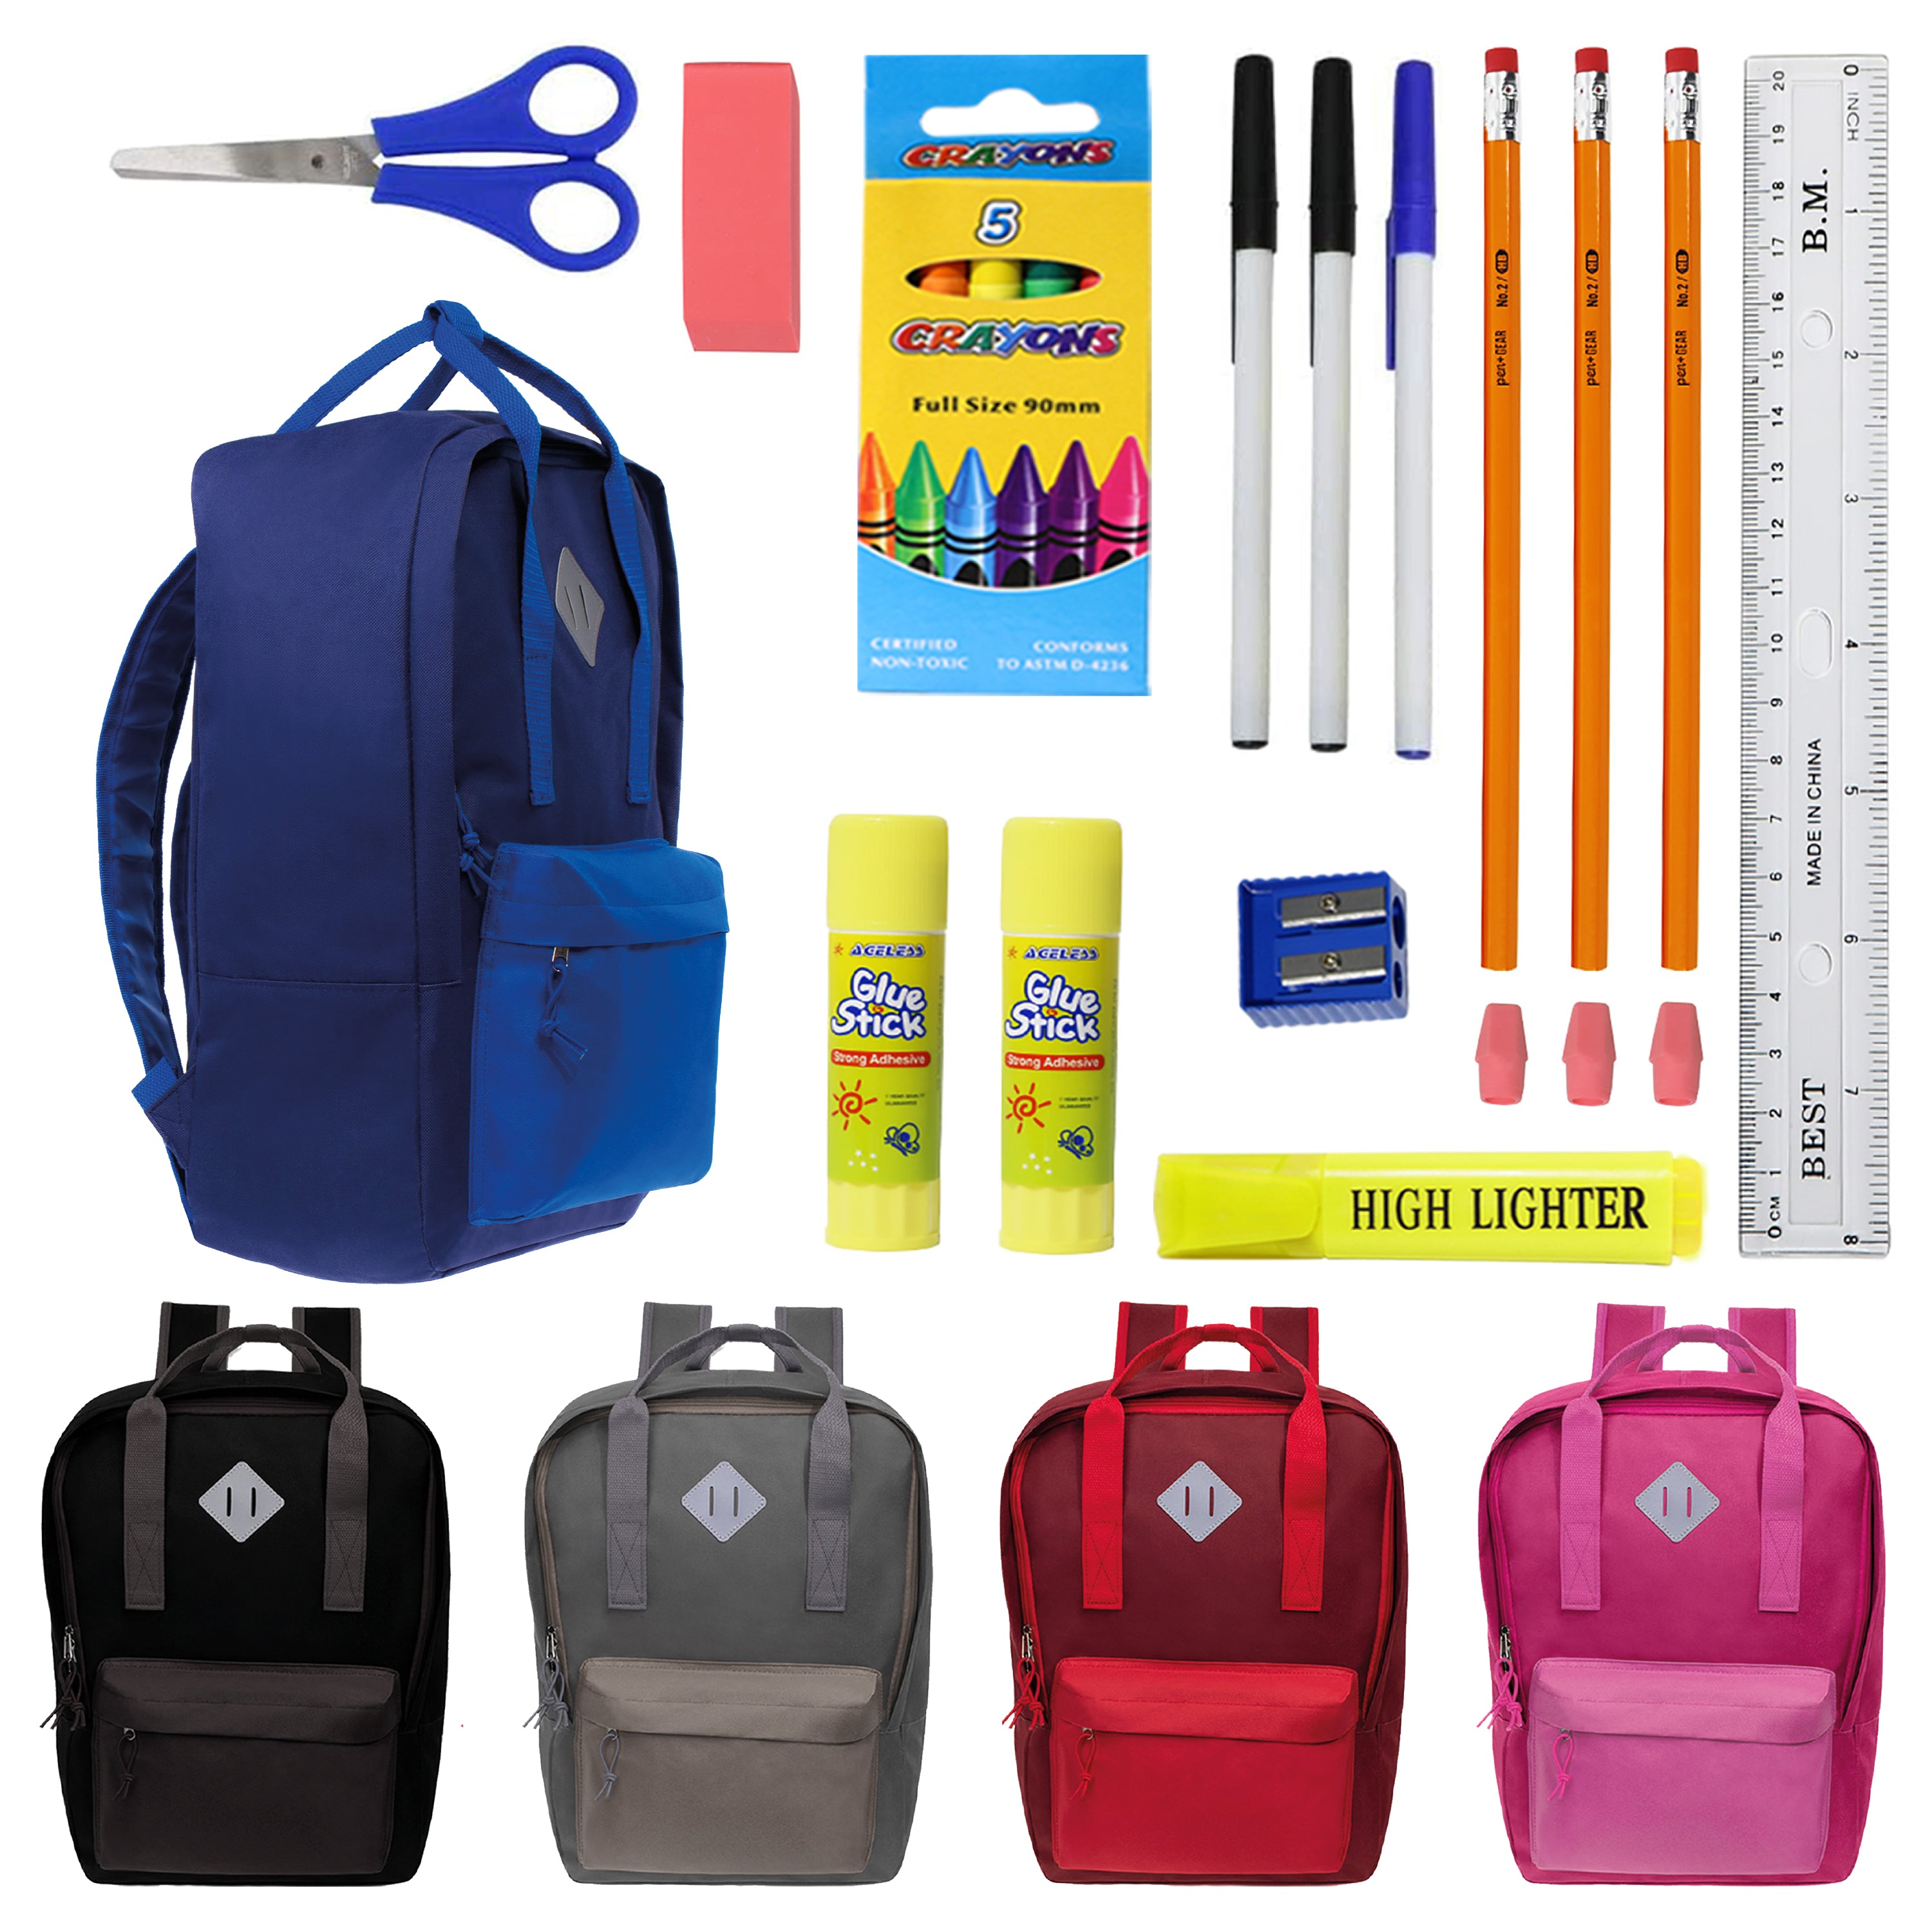 17 Inch Bulk Backpacks in Assorted Colors with School Supply Kits Wholesale - Case of 12